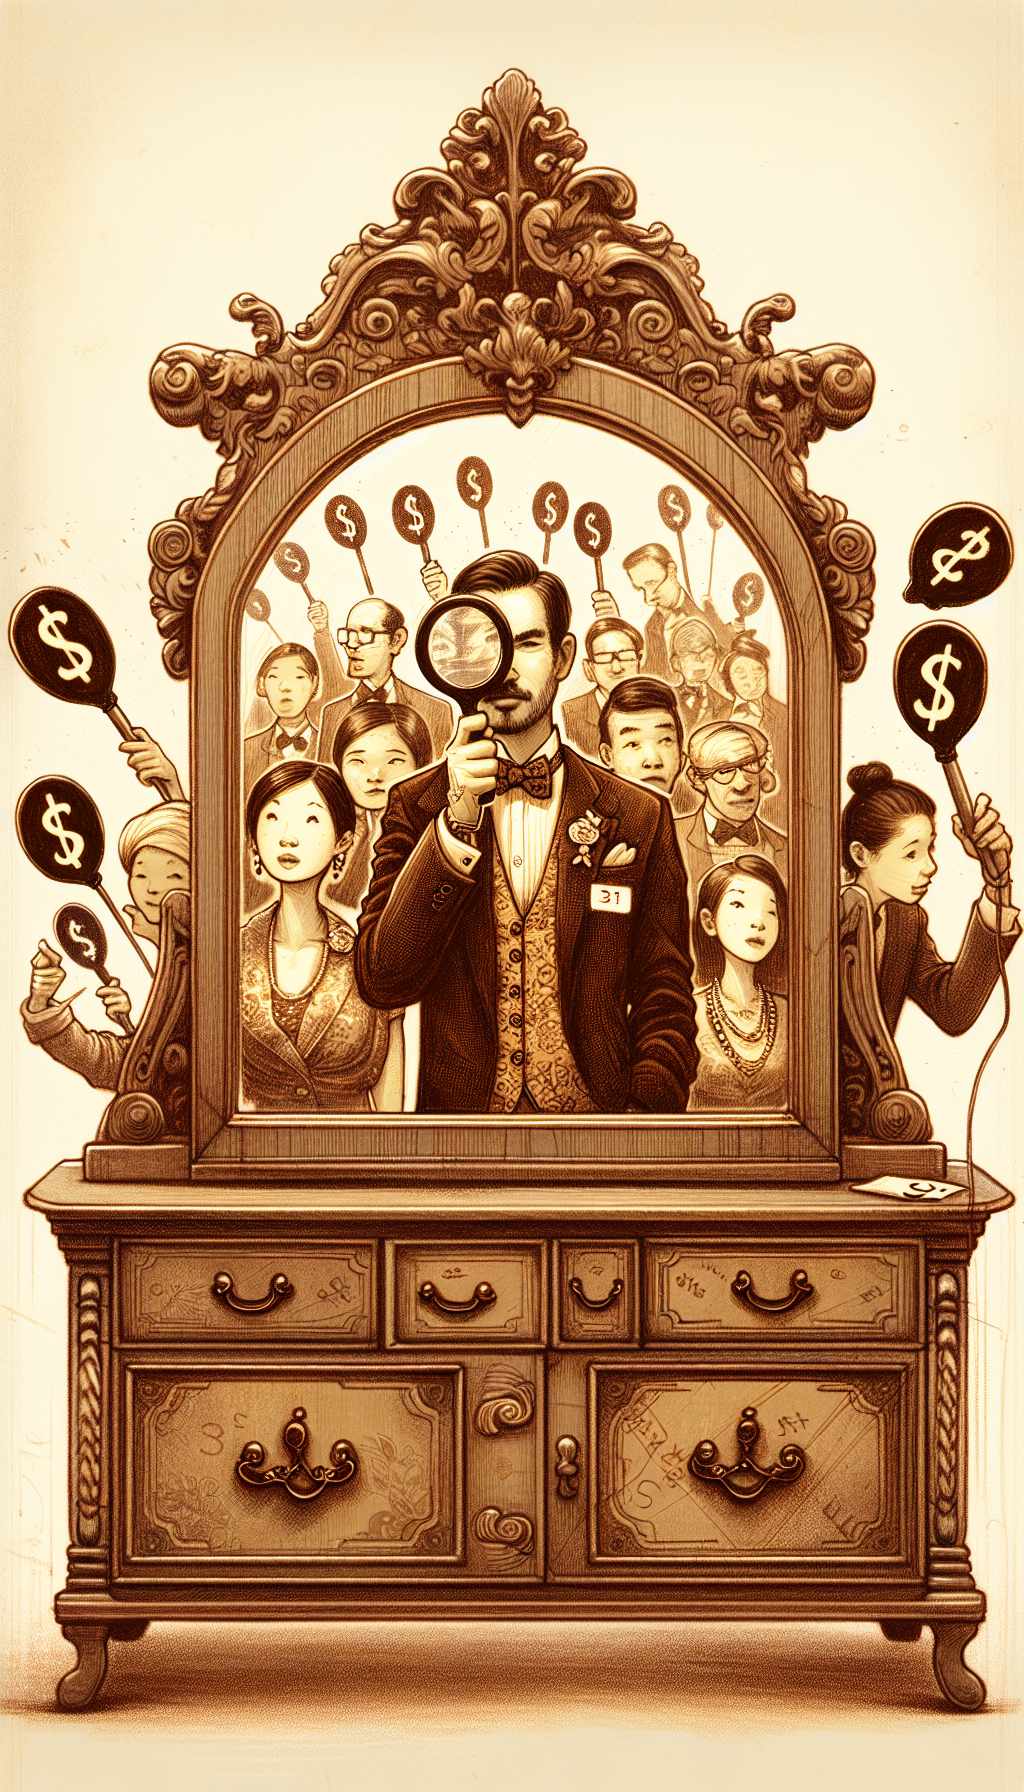 In a whimsical, sepia-toned sketch, an elegantly attired auctioneer peeks through an ornate antique dresser mirror, revealing a reflection crowded with mesmerized bidders, each clutching a magnifying glass and an auction paddle adorned with dollar signs and question marks, symbolizing the thrilling quest to discover the dresser's true value.